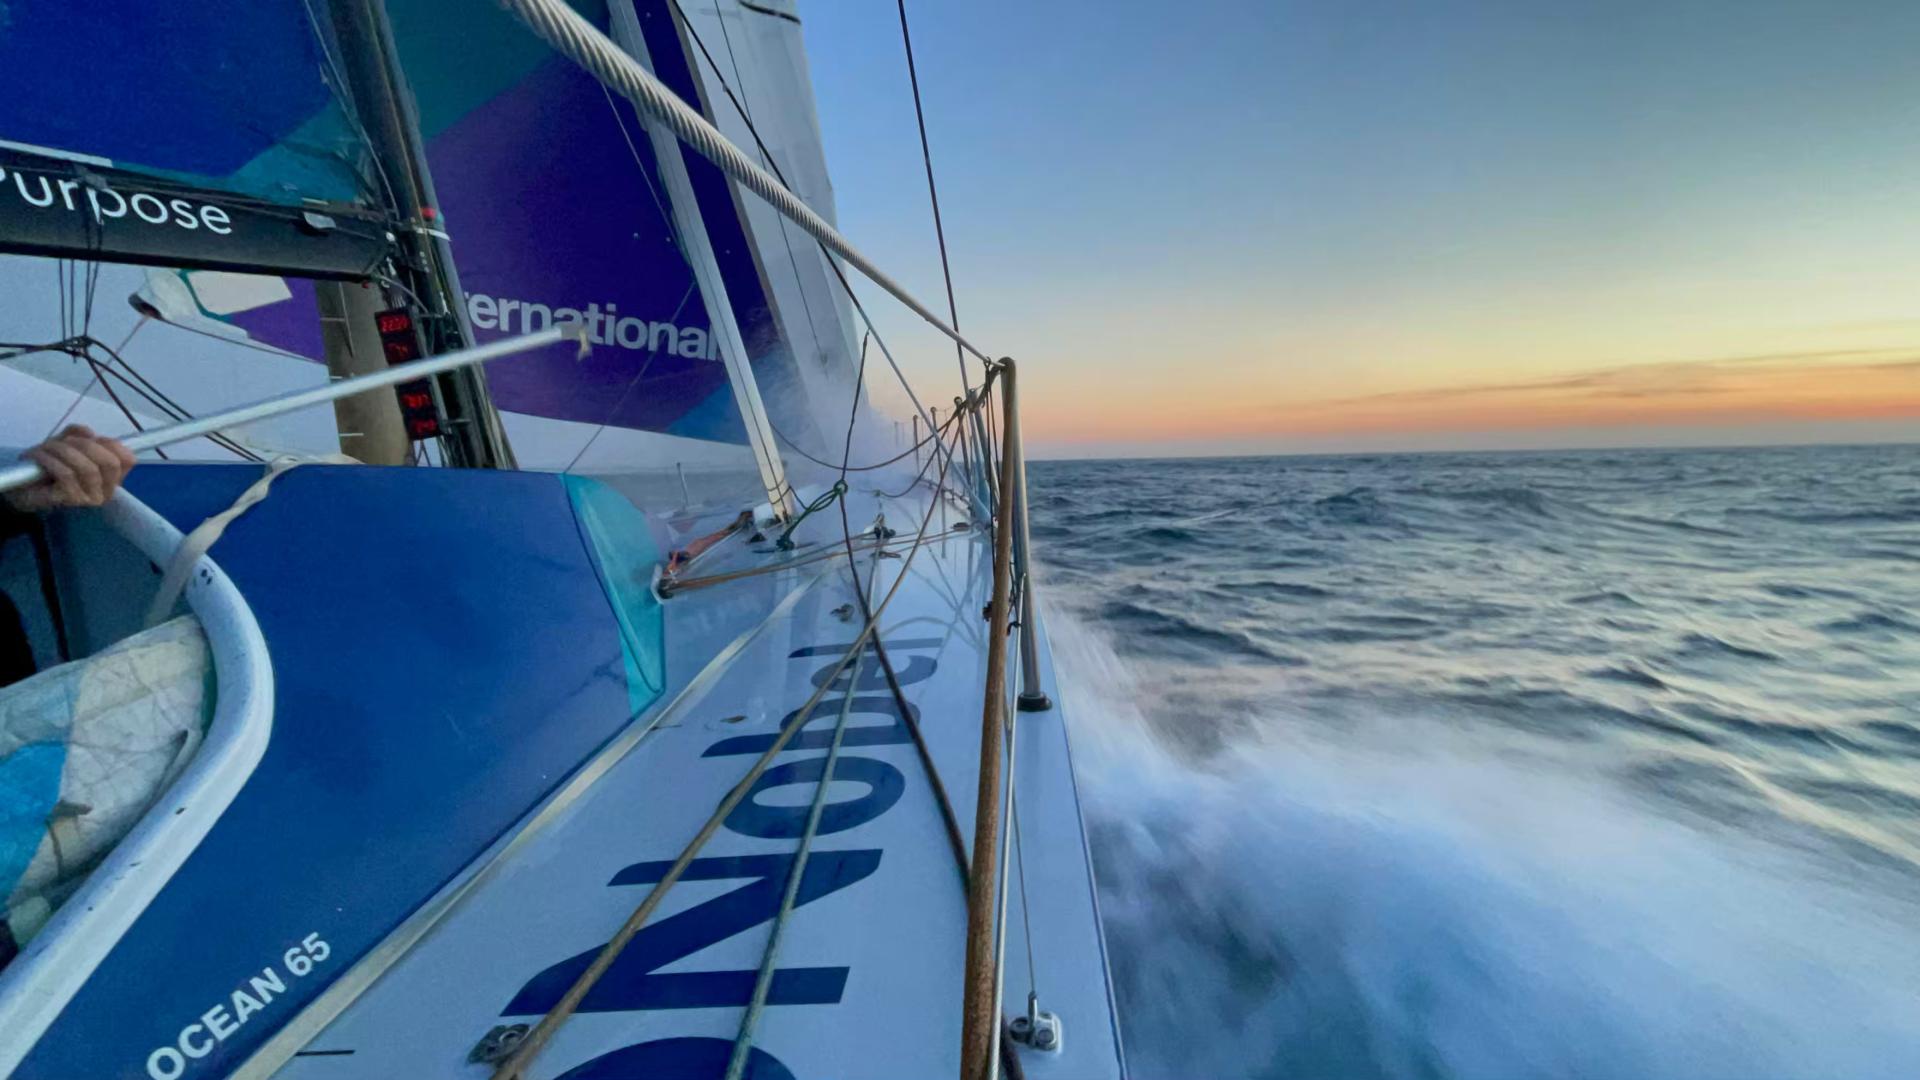 The Ocean Race Europe. Leg 1 from Lorient, France, to Cascais, Portugal. On Board AkzoNobel Ocean Racing